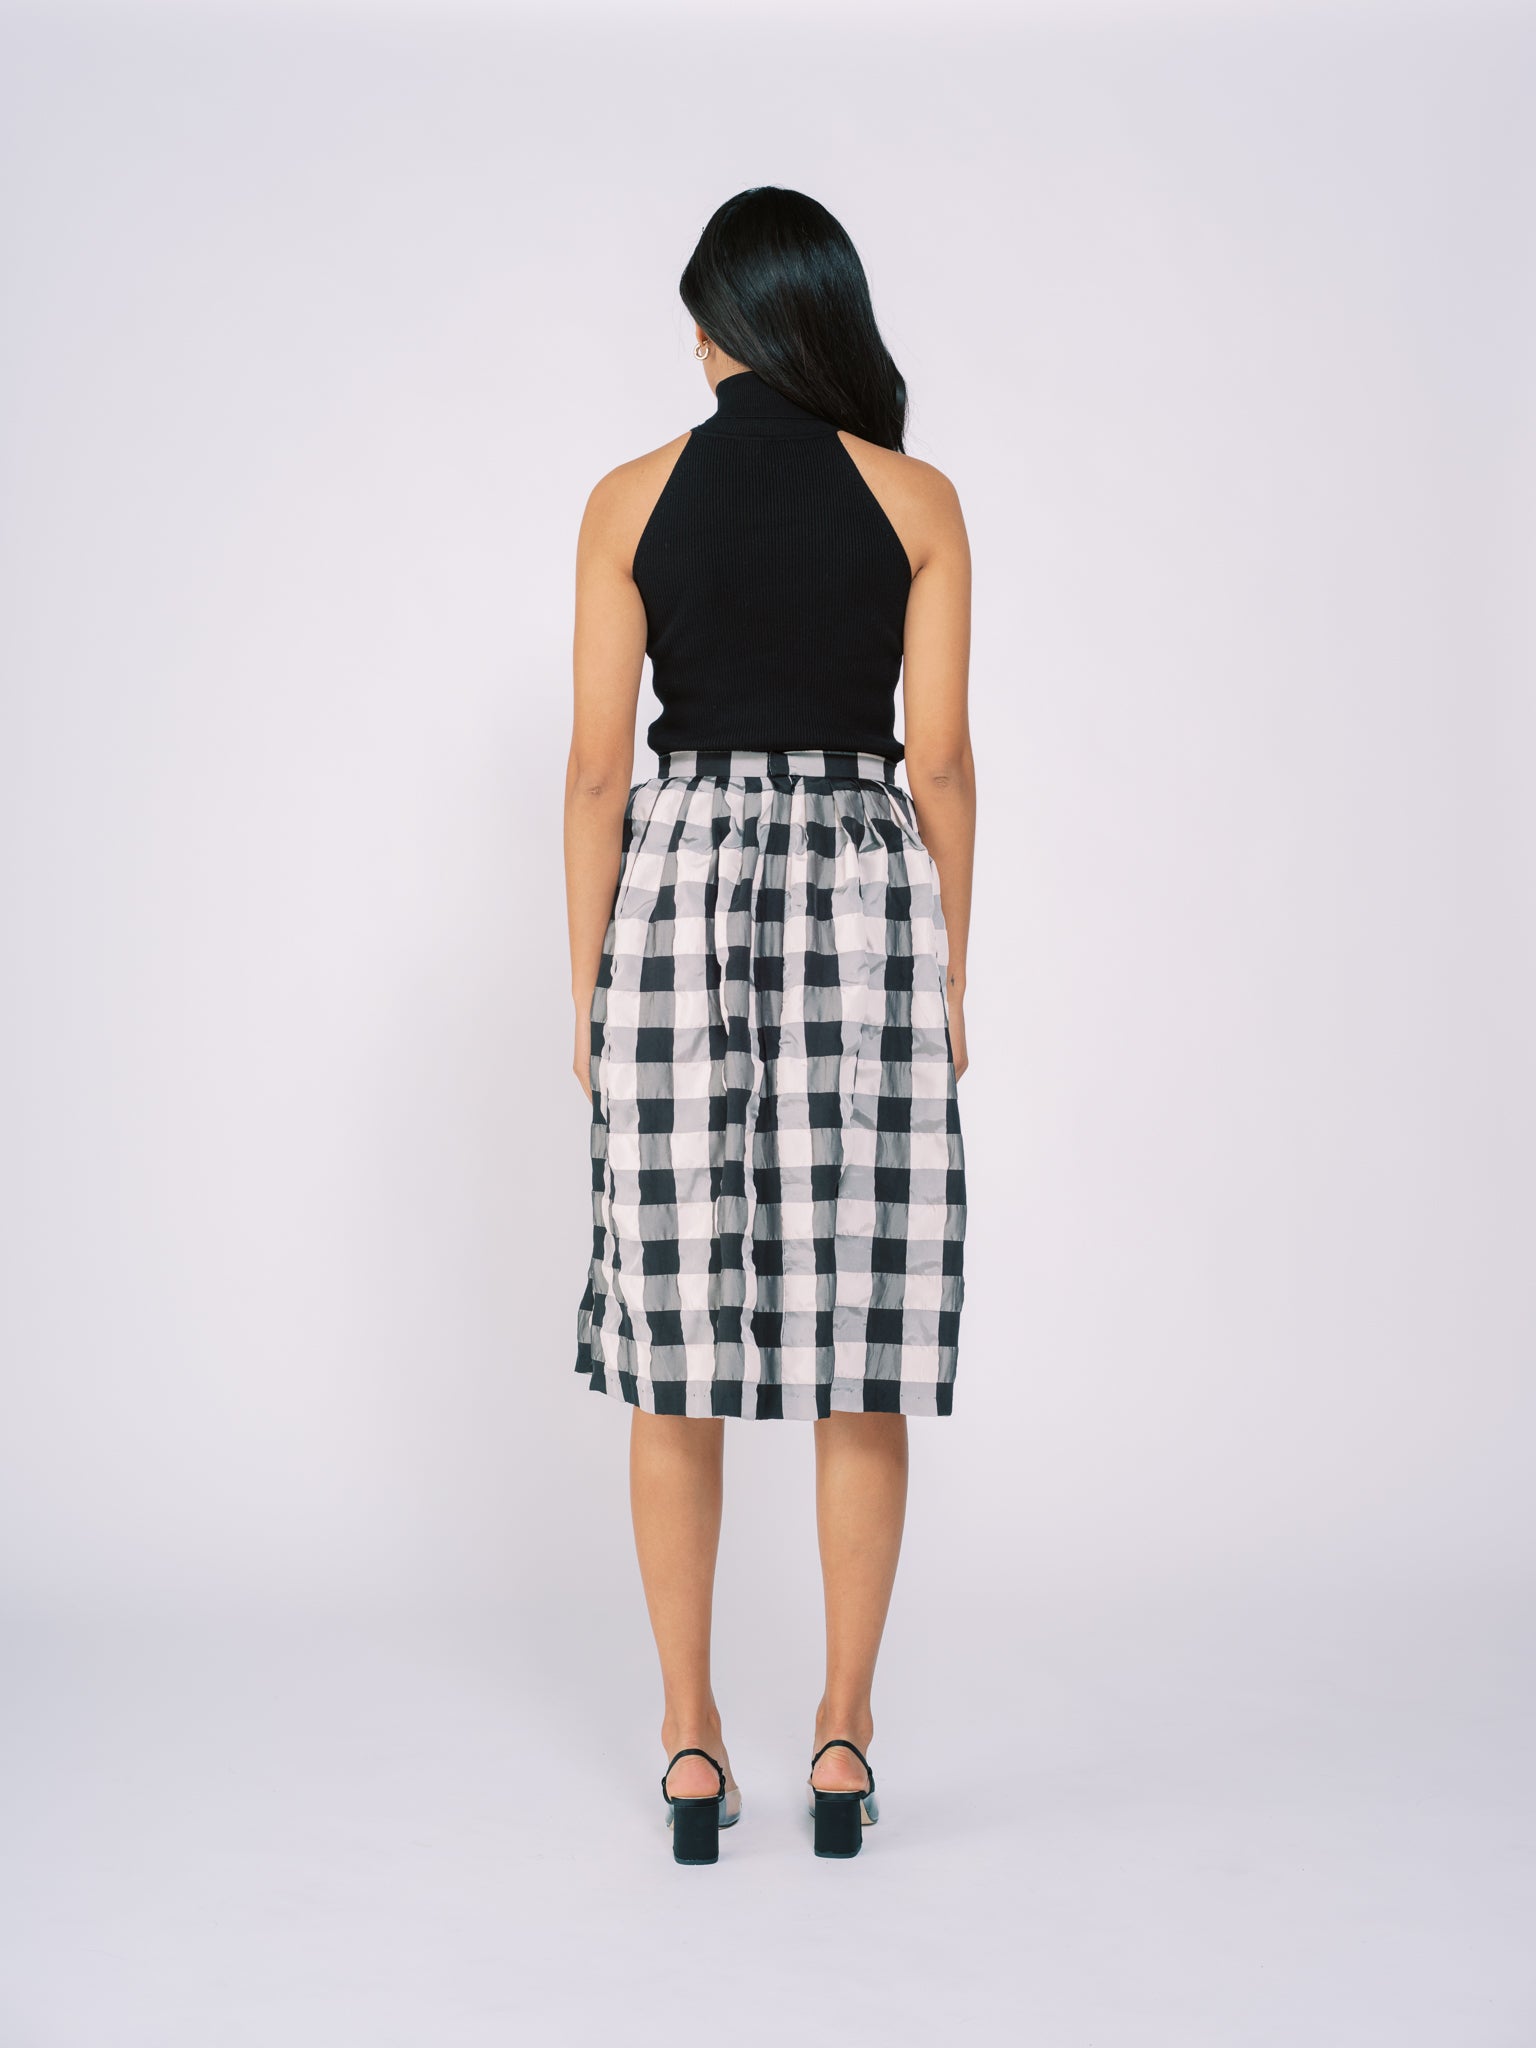 Pleated Midi Skirt in Black and White Checkered Pattern